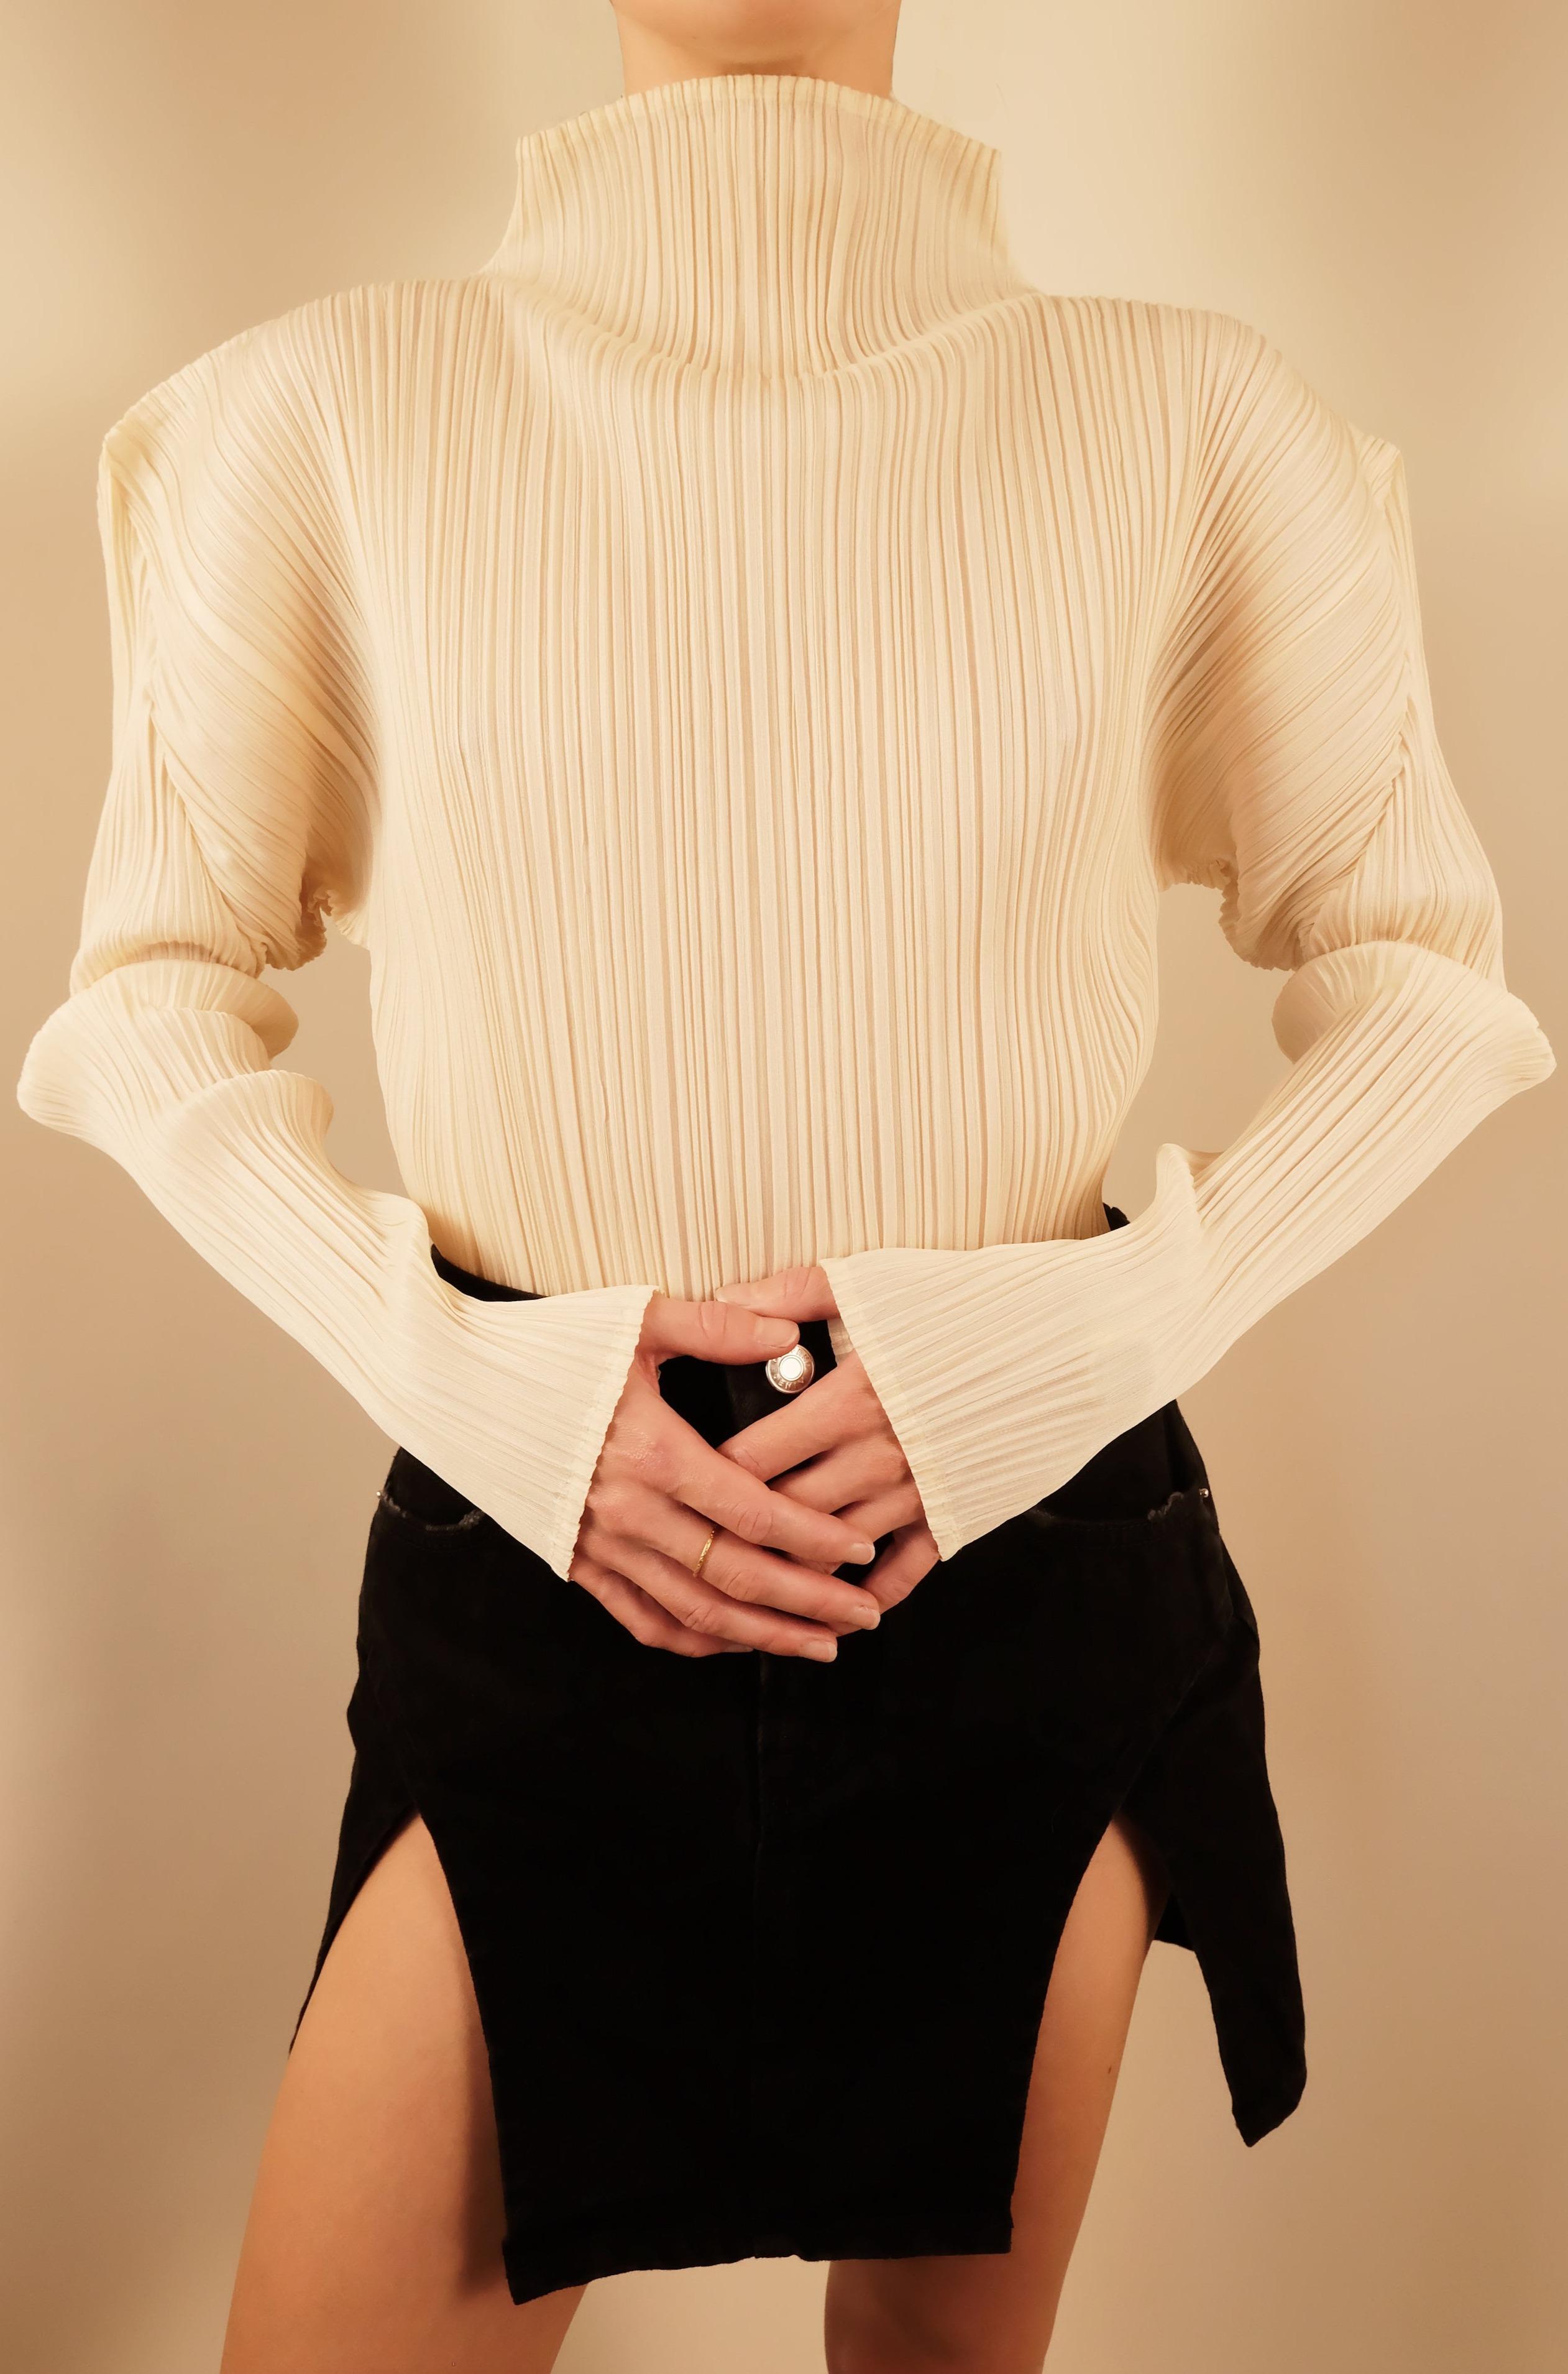 ISSEY MIYAKE Pleats Please Sculptural Cream Blouse with Exaggerated Silhouette In Good Condition In Morongo Valley, CA